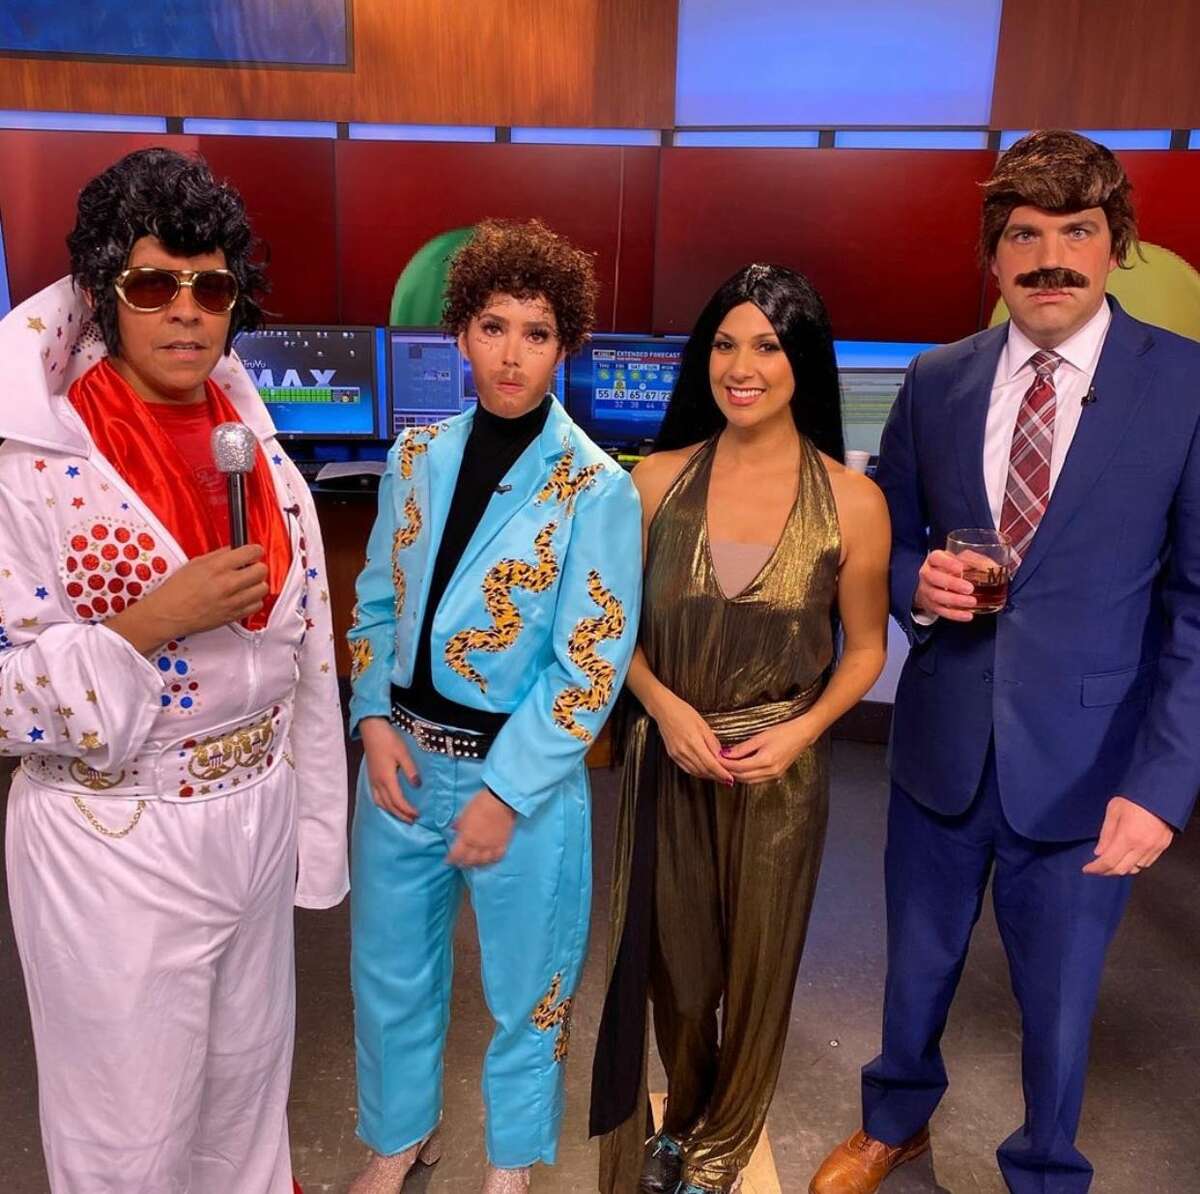 "Fox News First" morning crew dressed up for Halloween. Ernie Zuniga (far left) as Elvis, Breanna Barrs (left) as Post Malone, Vanessa Martin as Cher and Brad Sowder as Ron Burgandy.